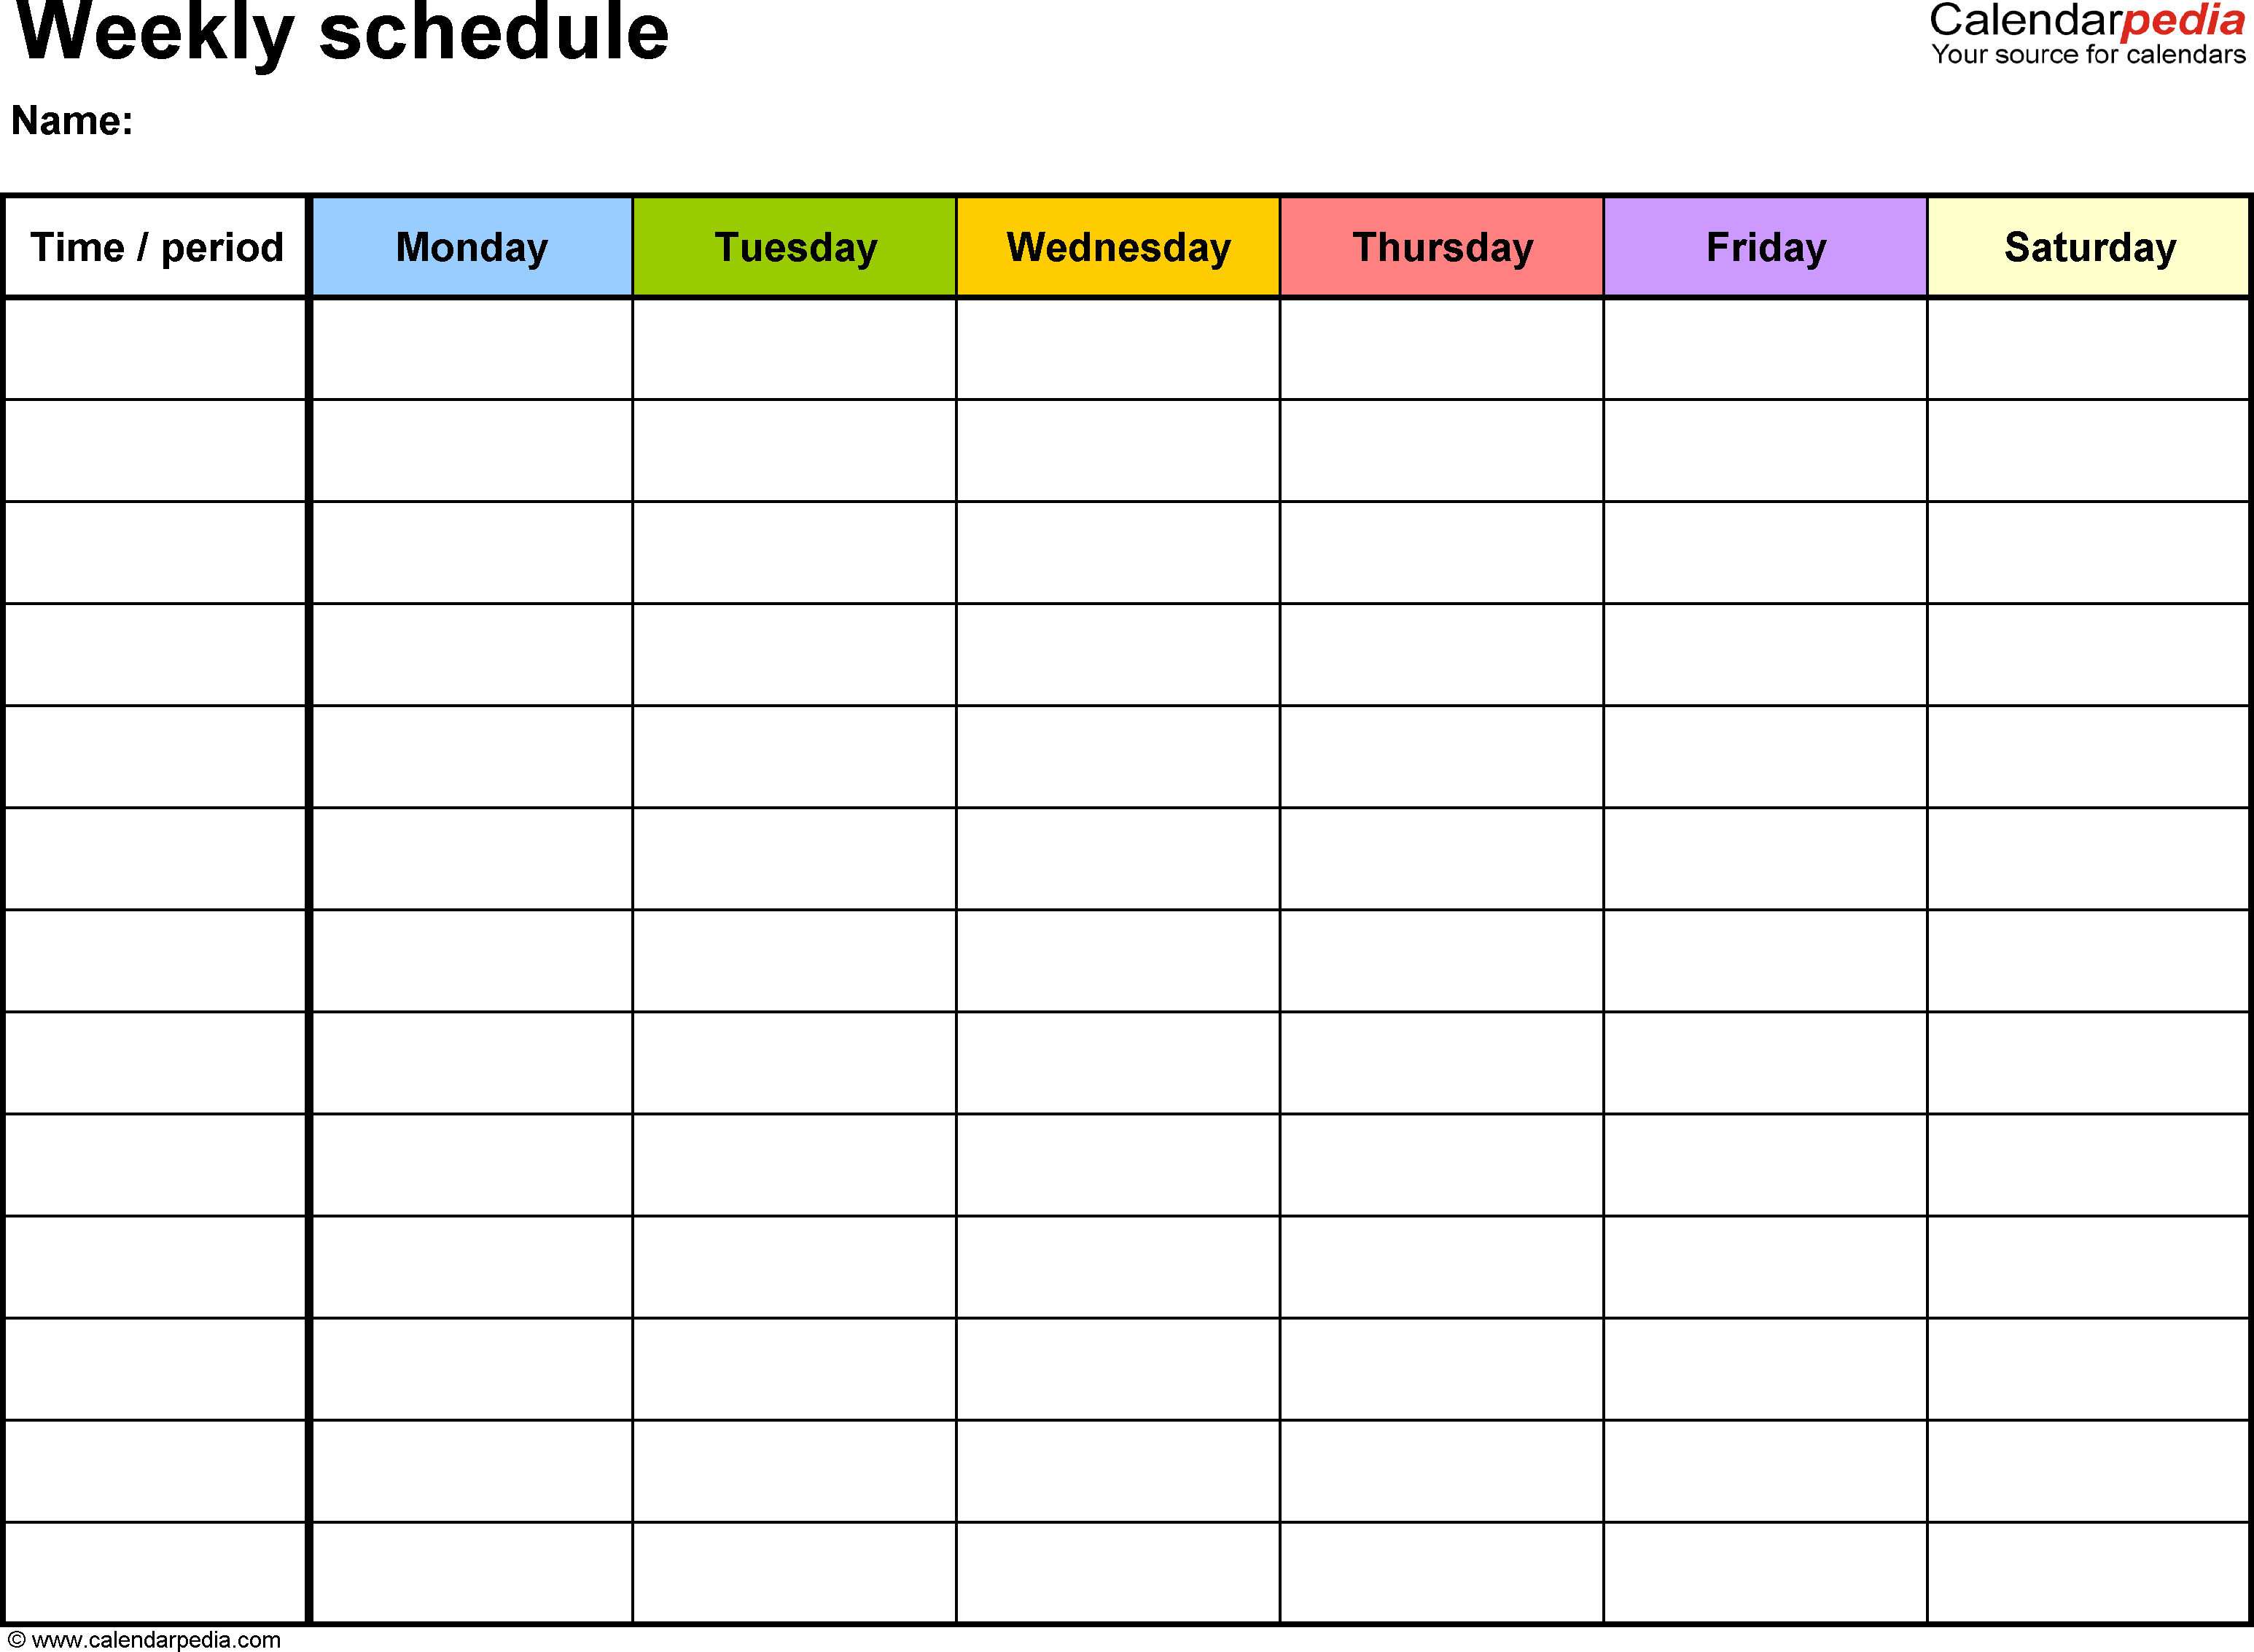 Weekly+Schedule+Template | Weekly Calendar Template pertaining to Weekly Schedule With Time Slots